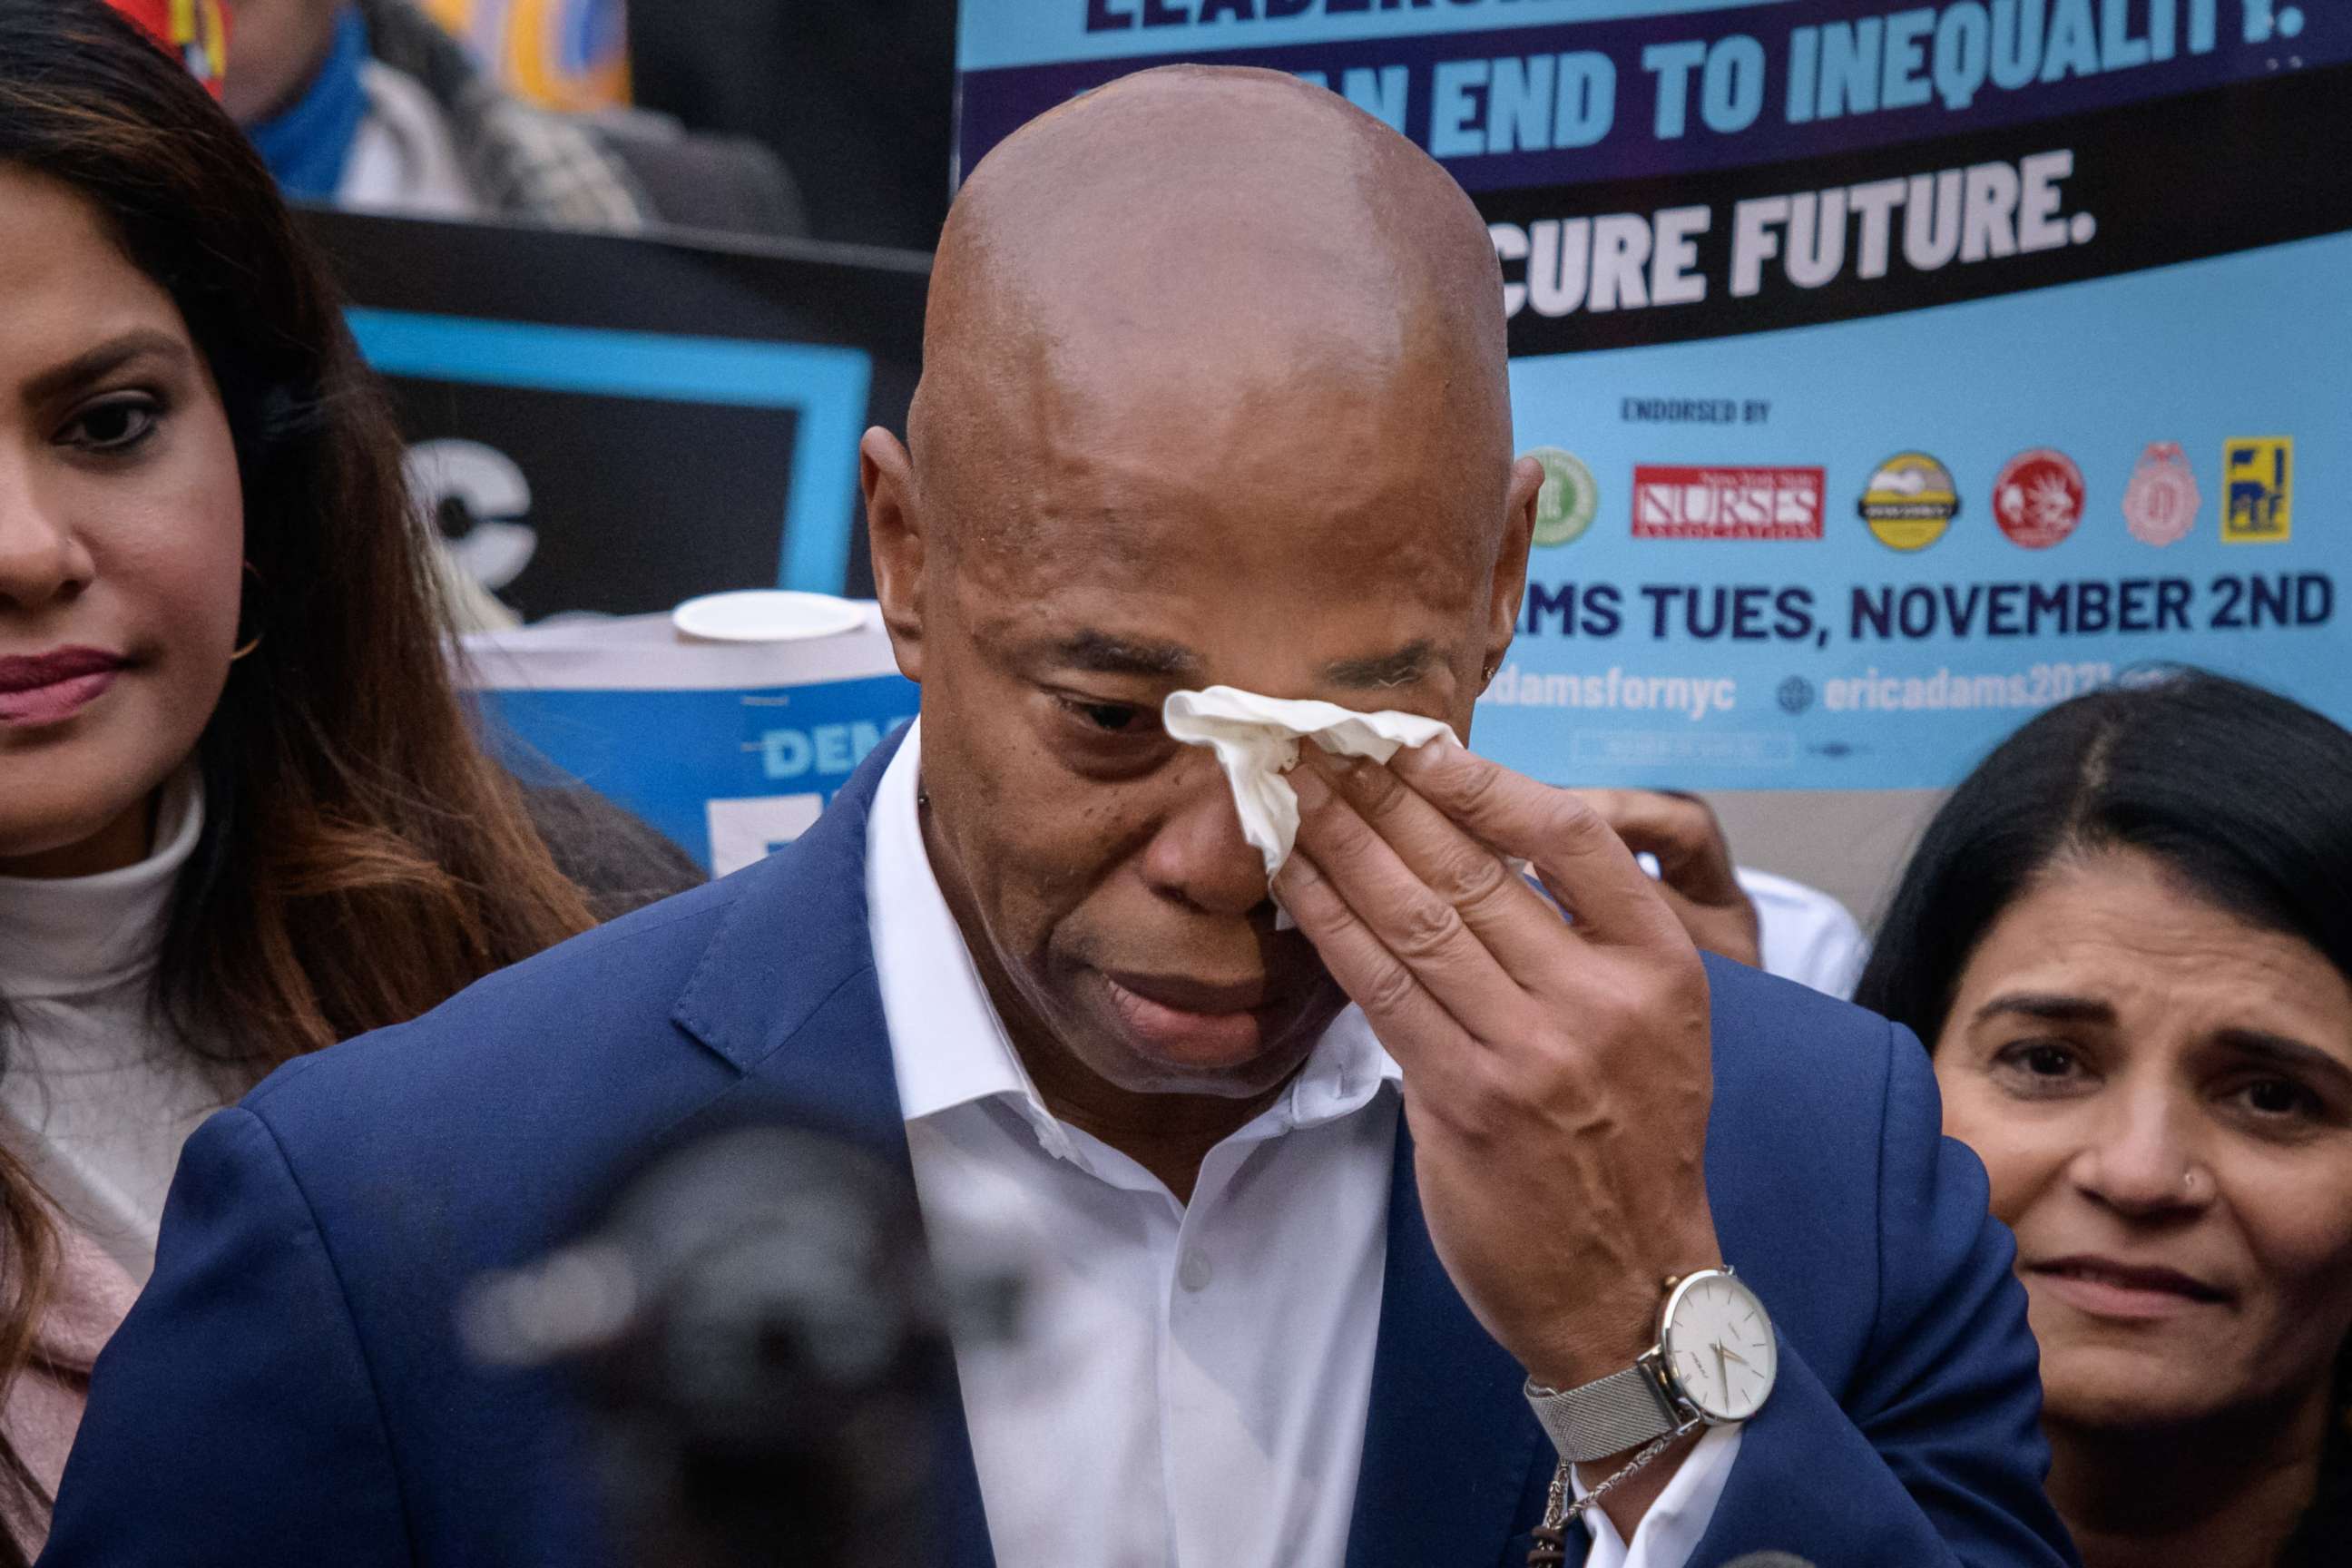 PHOTO: New York democratic mayoral candidate Eric Adams wipes his eyes as he speaks to the media and supporters upon leaving a voting center after casting his ballot, in Brooklyn, New York, on Nov. 2, 2021.